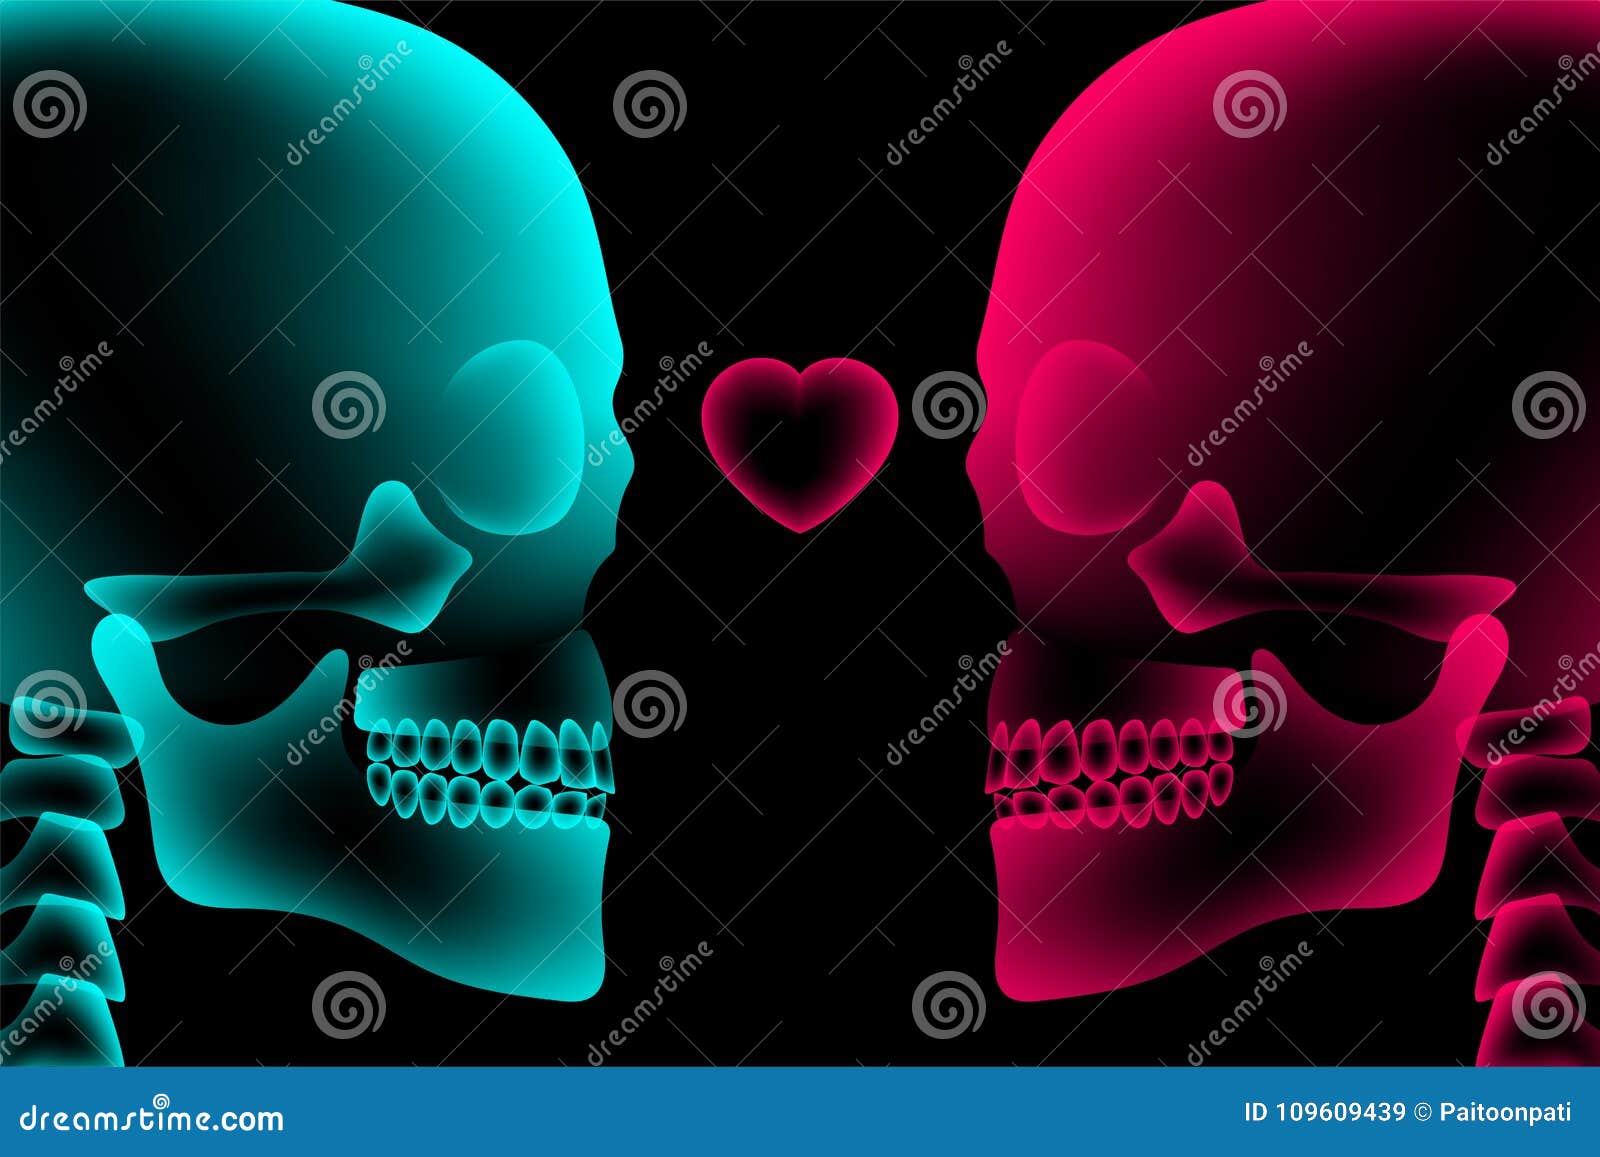 Download Skull Couple X-ray With Heart Symbol, Love Concept Design, Side View Illustration Stock Vector ...